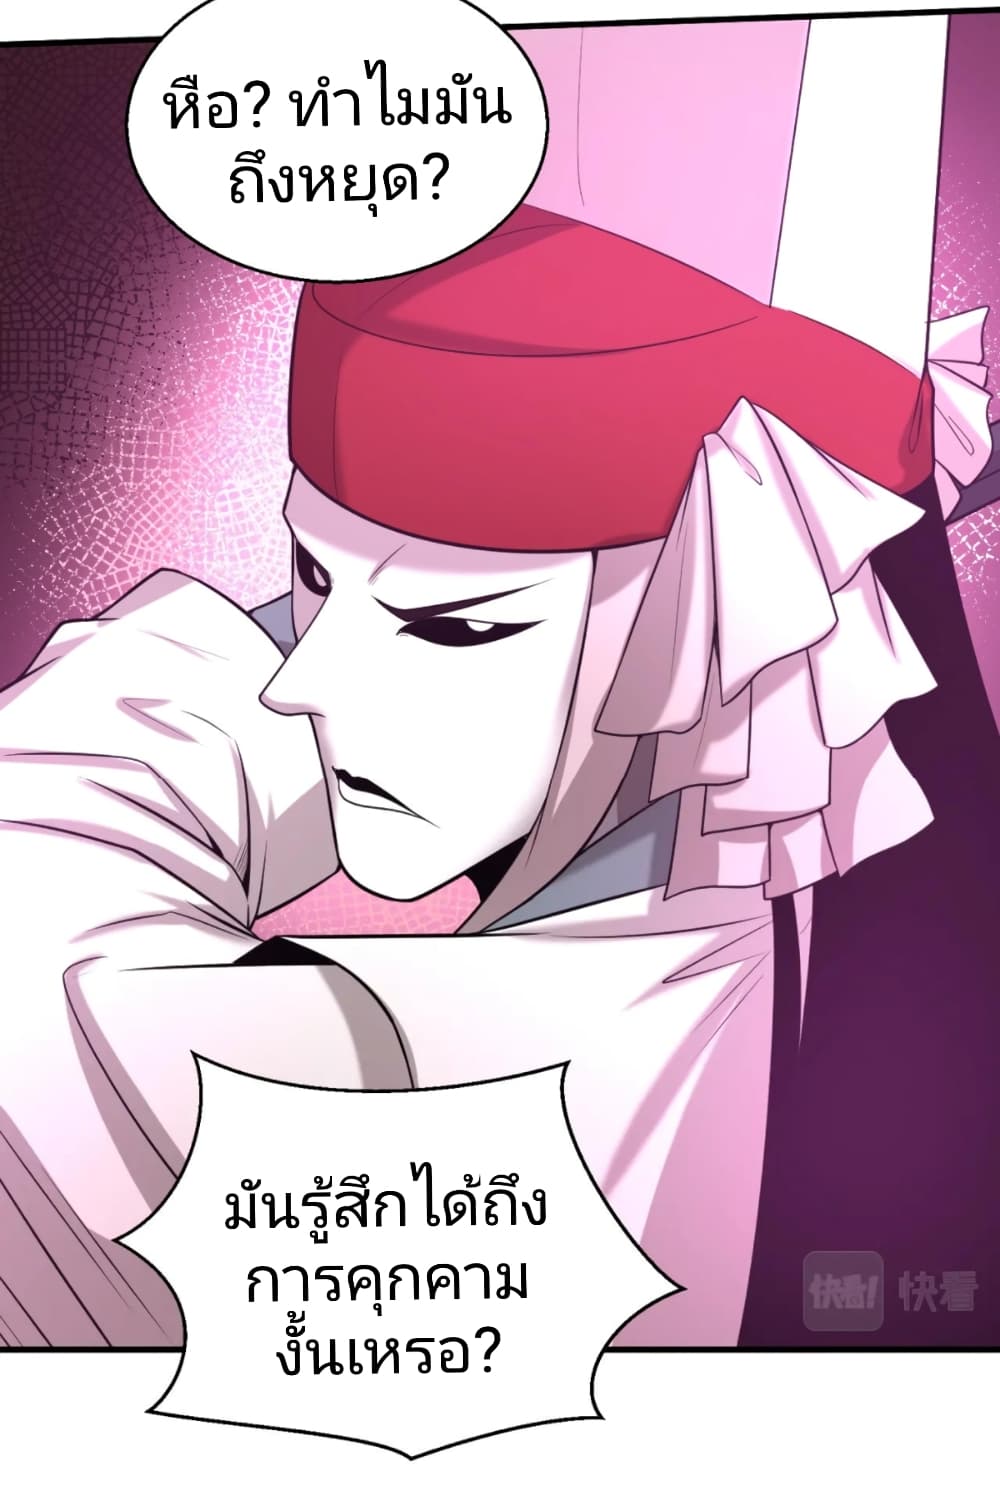 The Age of Ghost Spirits à¸à¸­à¸à¸à¸µà¹ 30 (28)